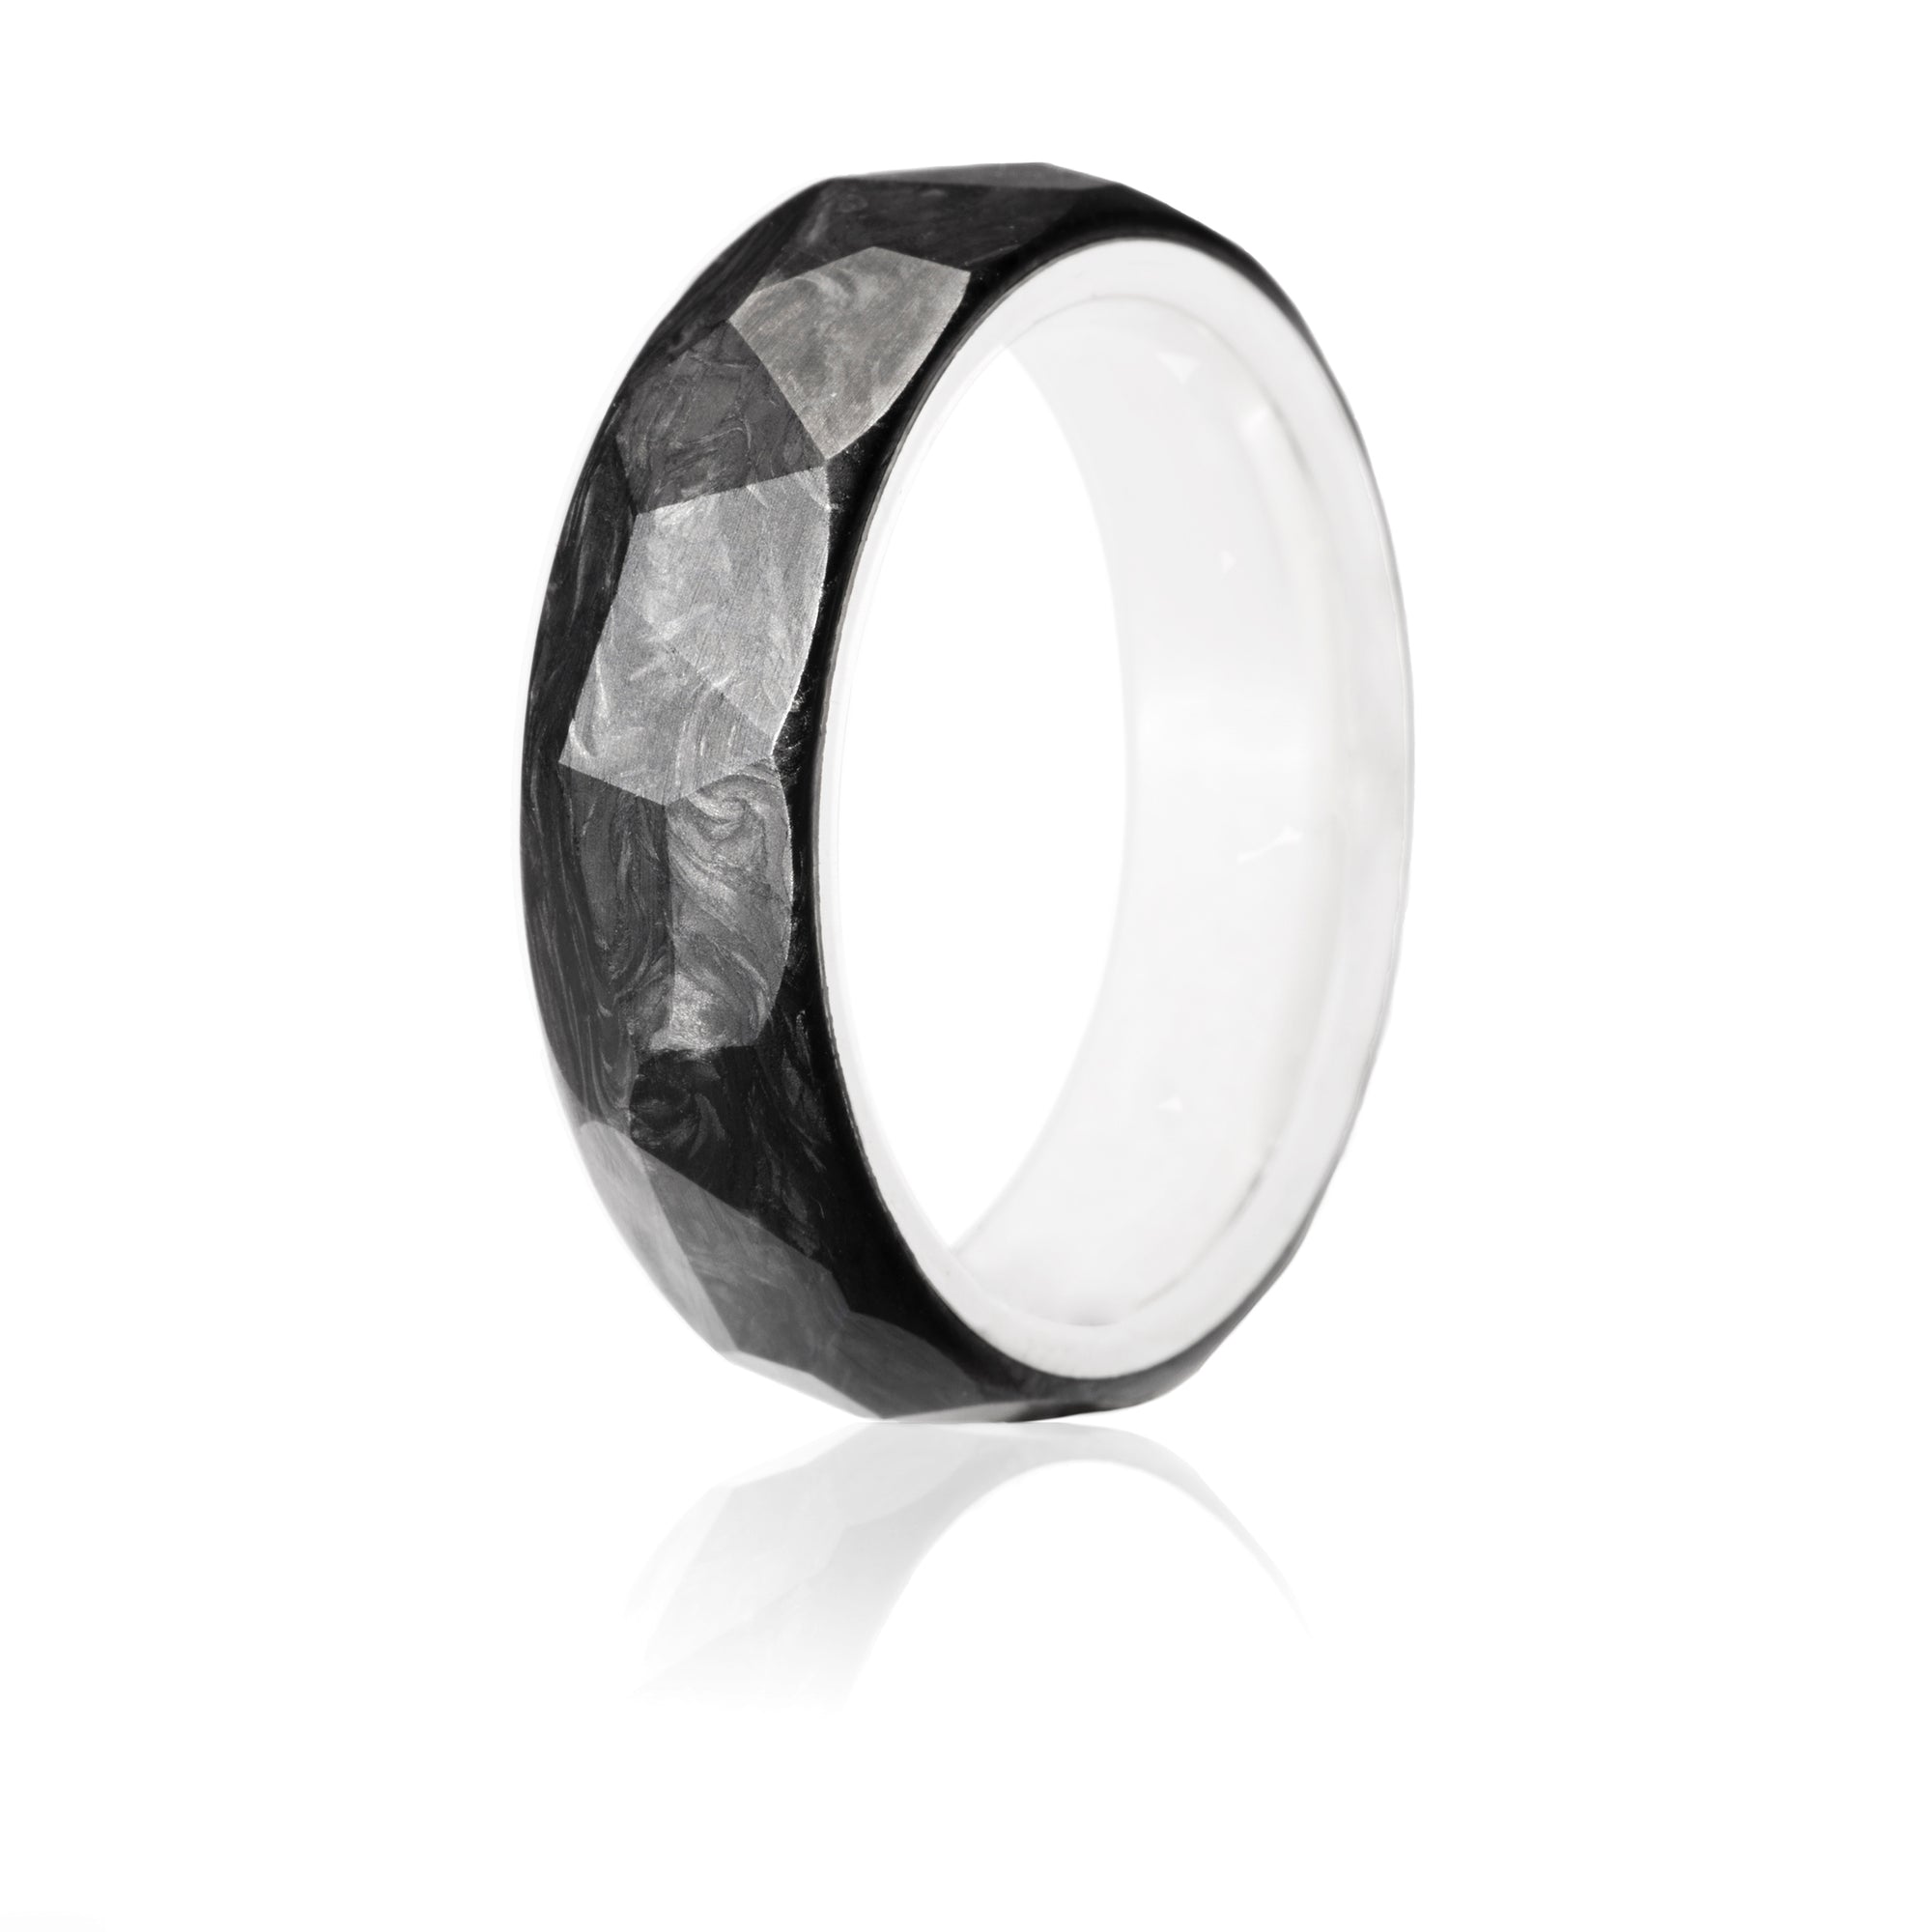 Forged carbon ring with faceted exterior and silver interior. 